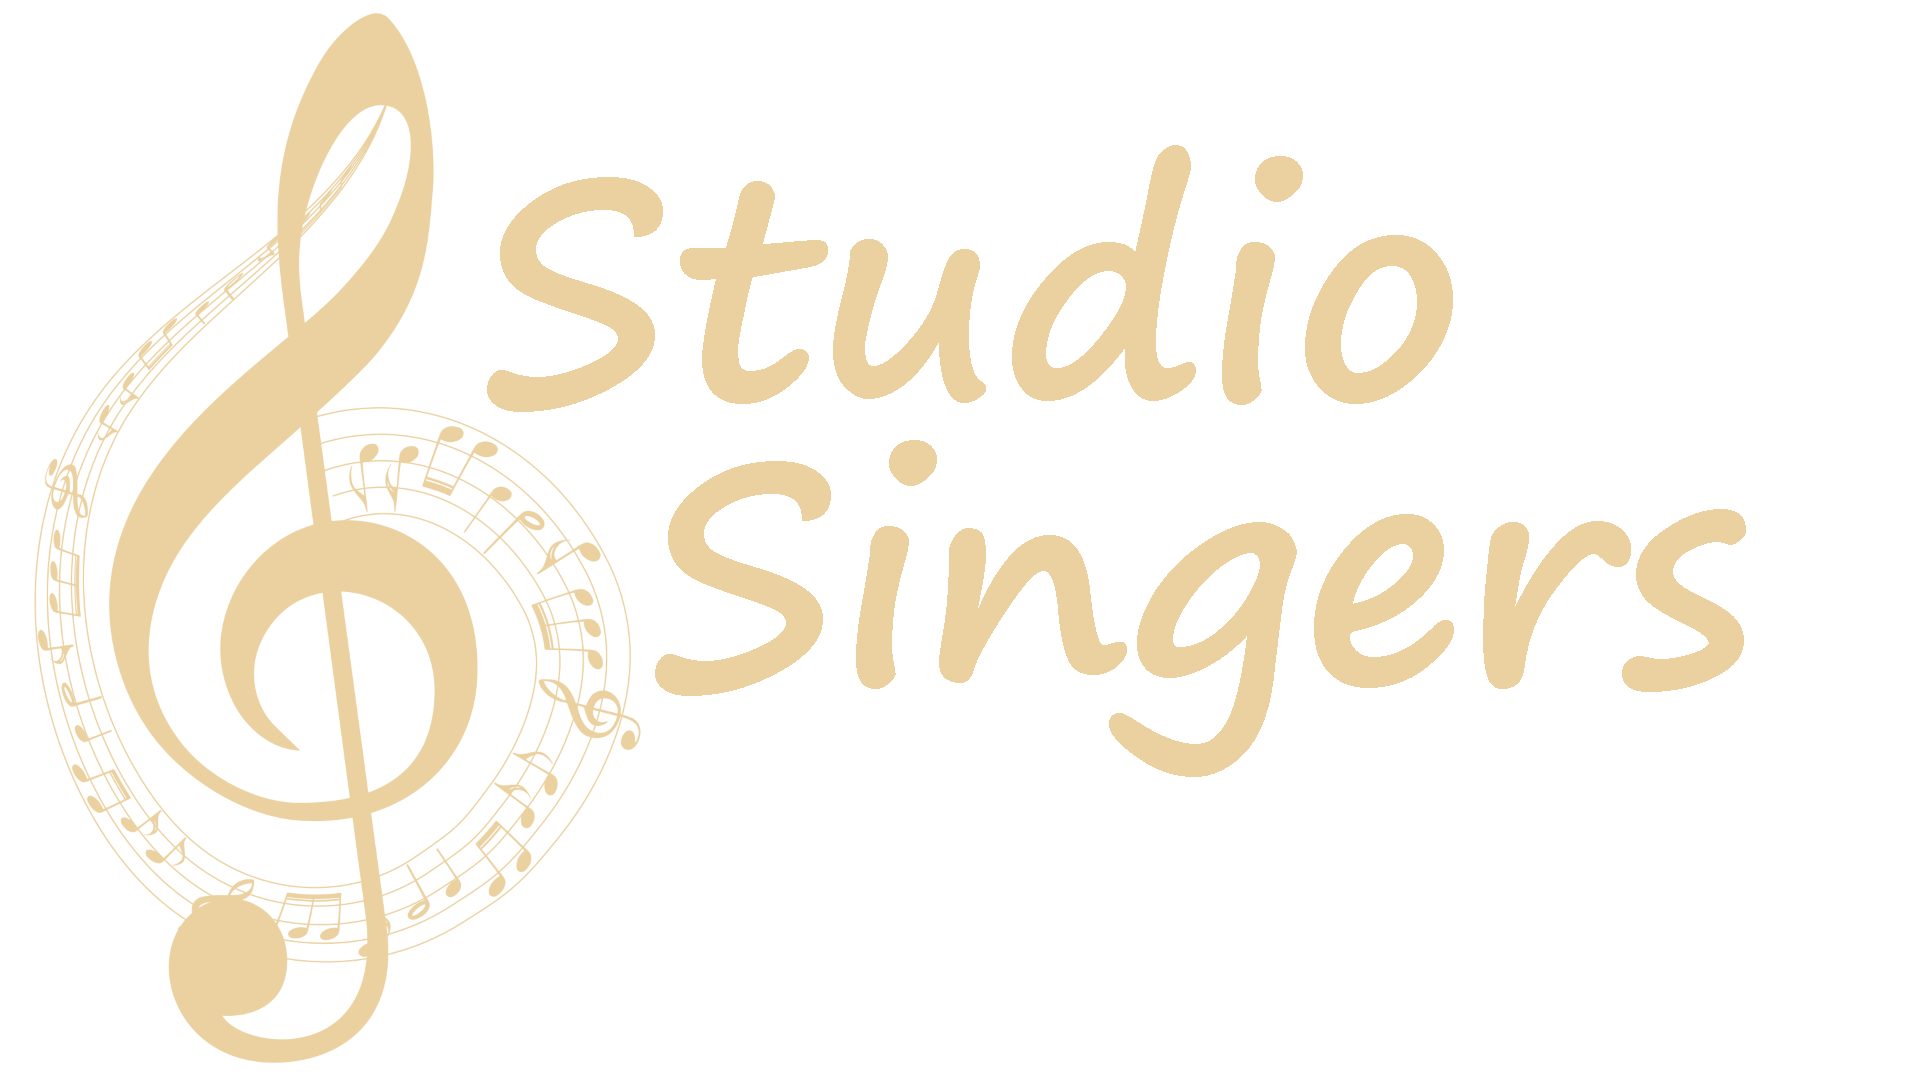 Champagne colored logo with that includes a treble clef with sheet music bars and notes swirling around it and to the right is the name of the organization: Studio Singers